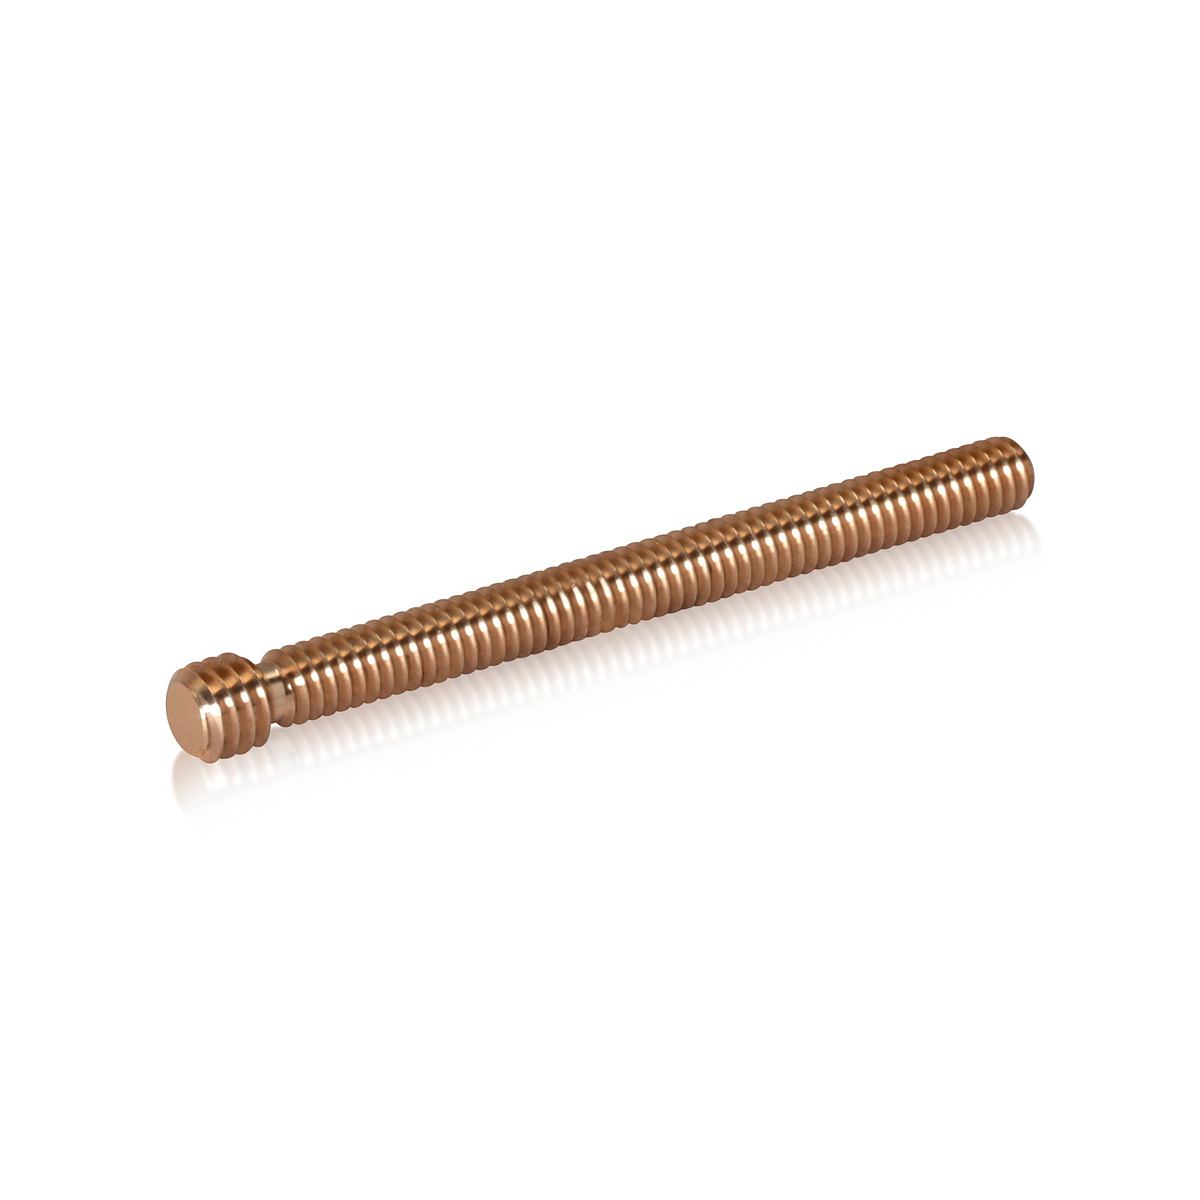 5/16-18 to 1/4-20 Conversion Set Screw, Total Length: 3 1/16''